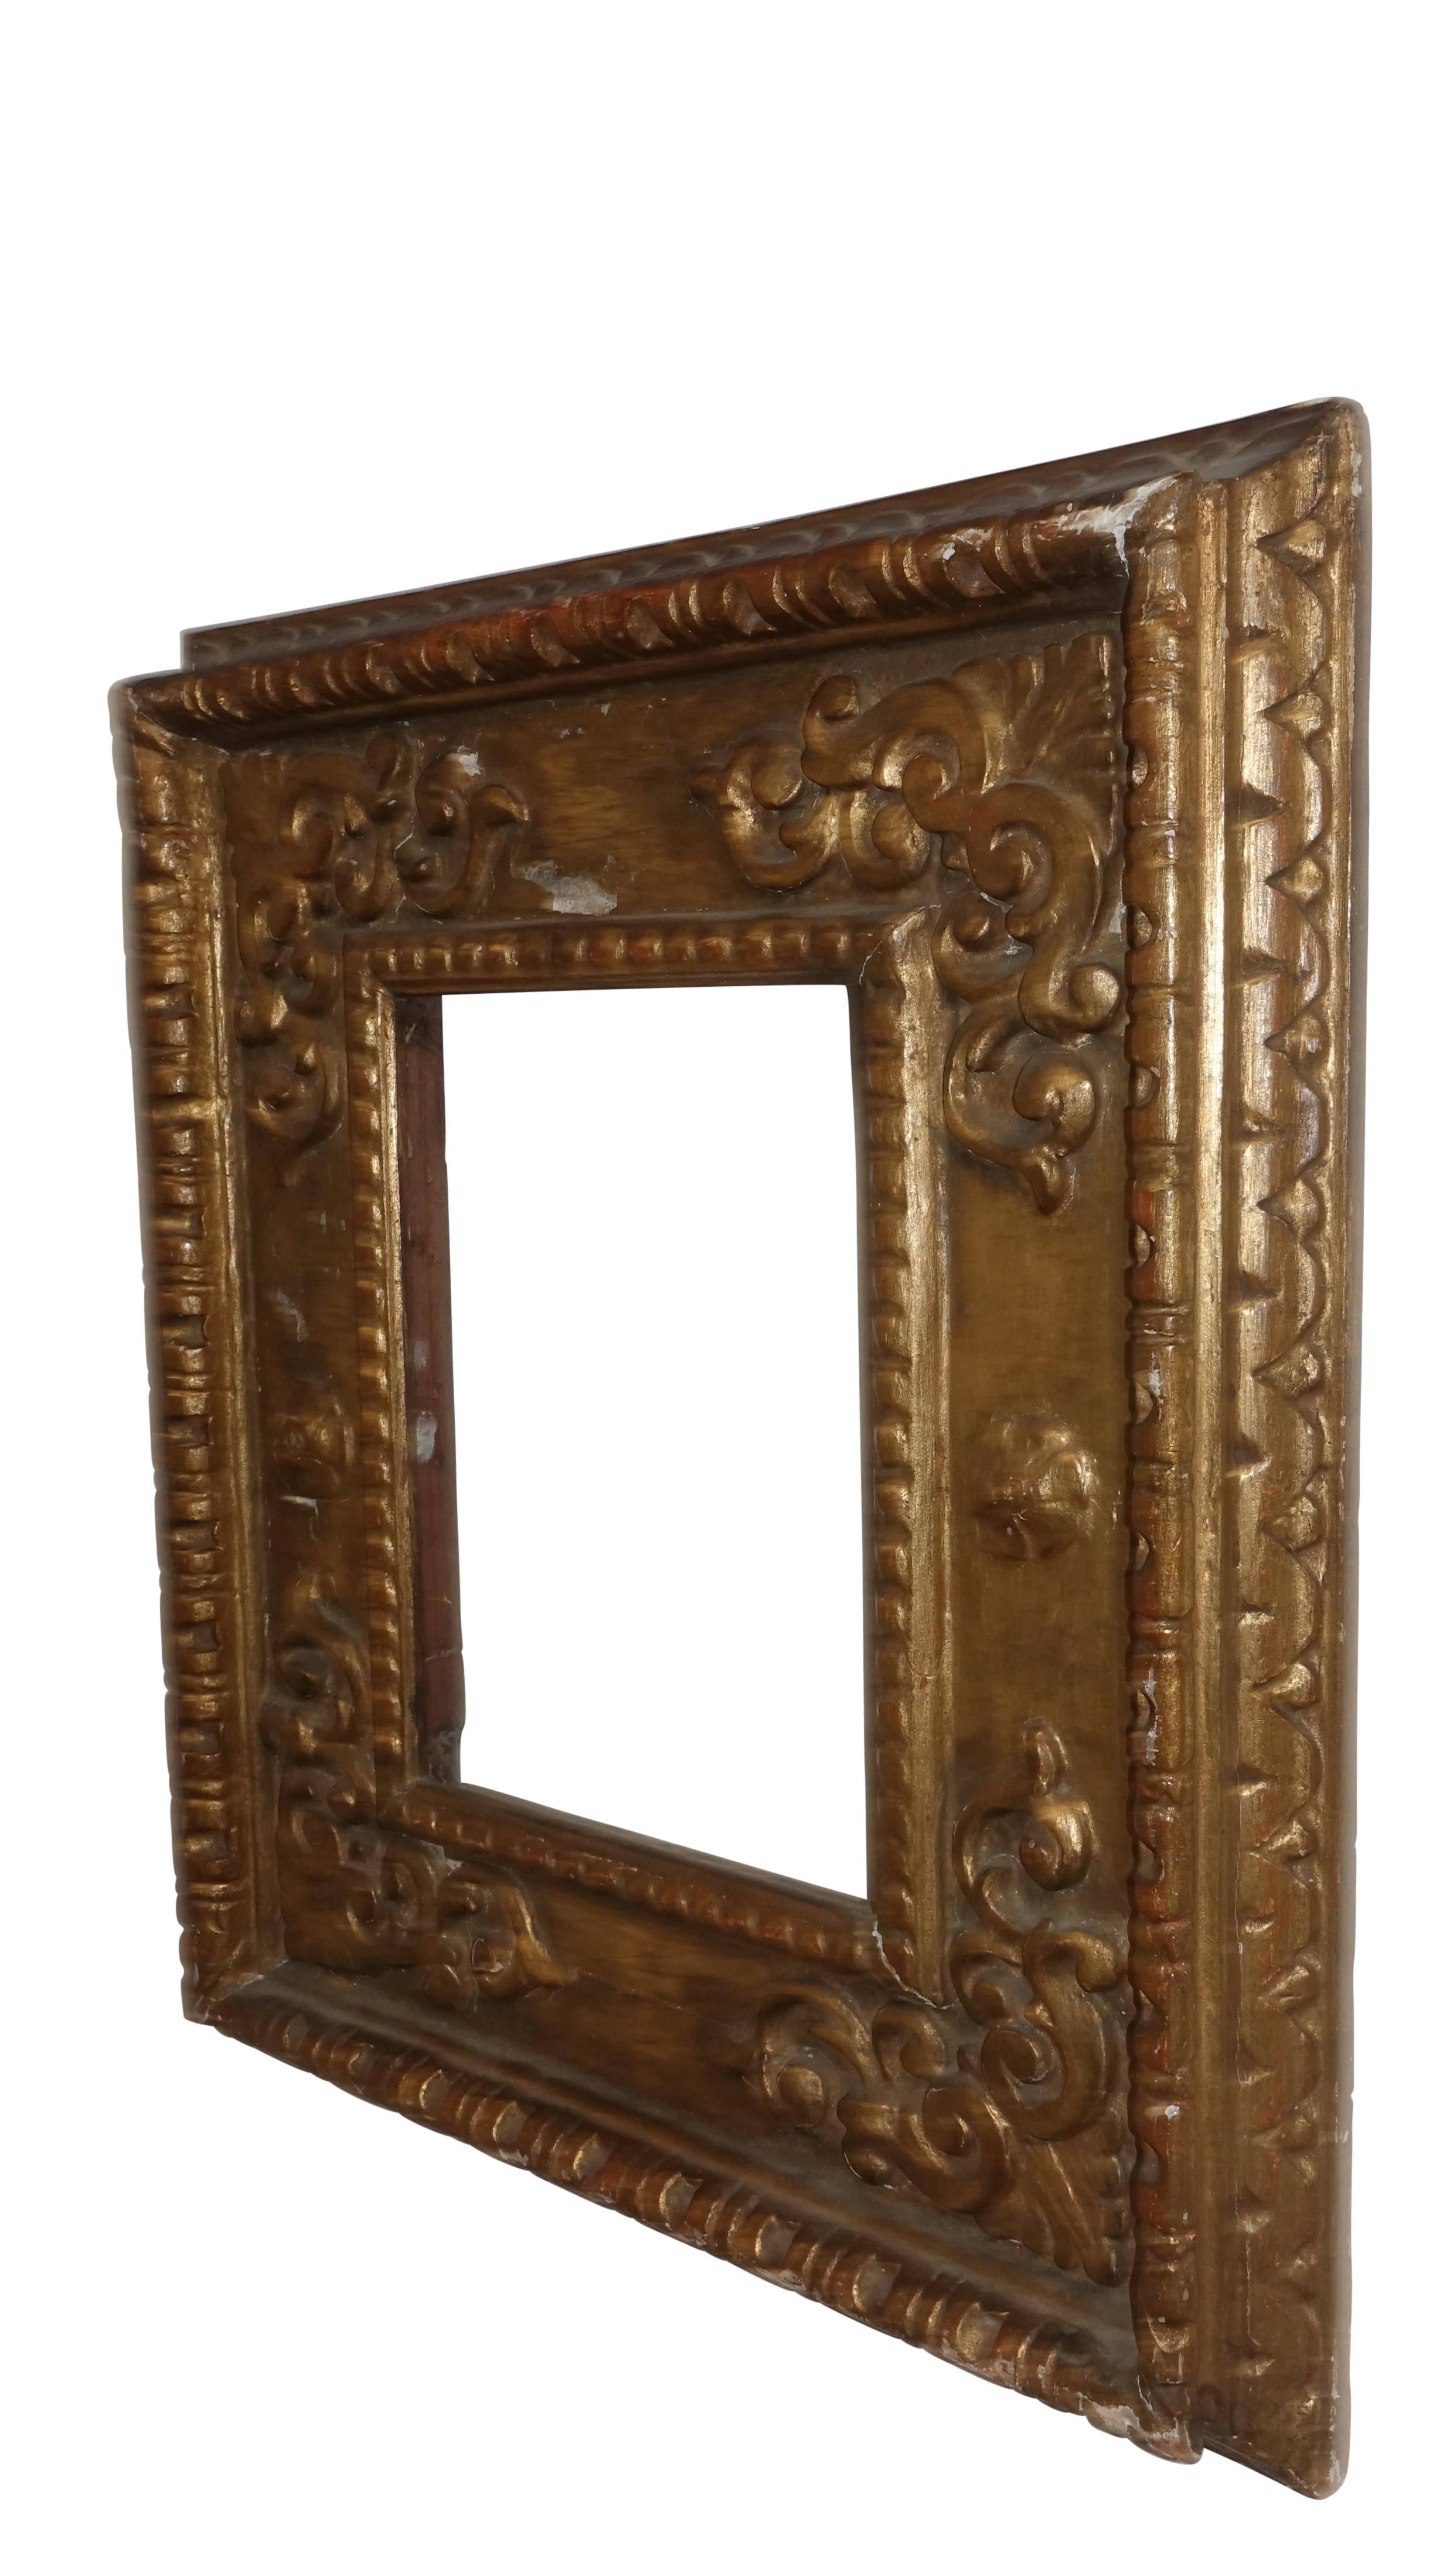 A nicely carved wood and gilt frame, Spanish Colonial, 18th century.